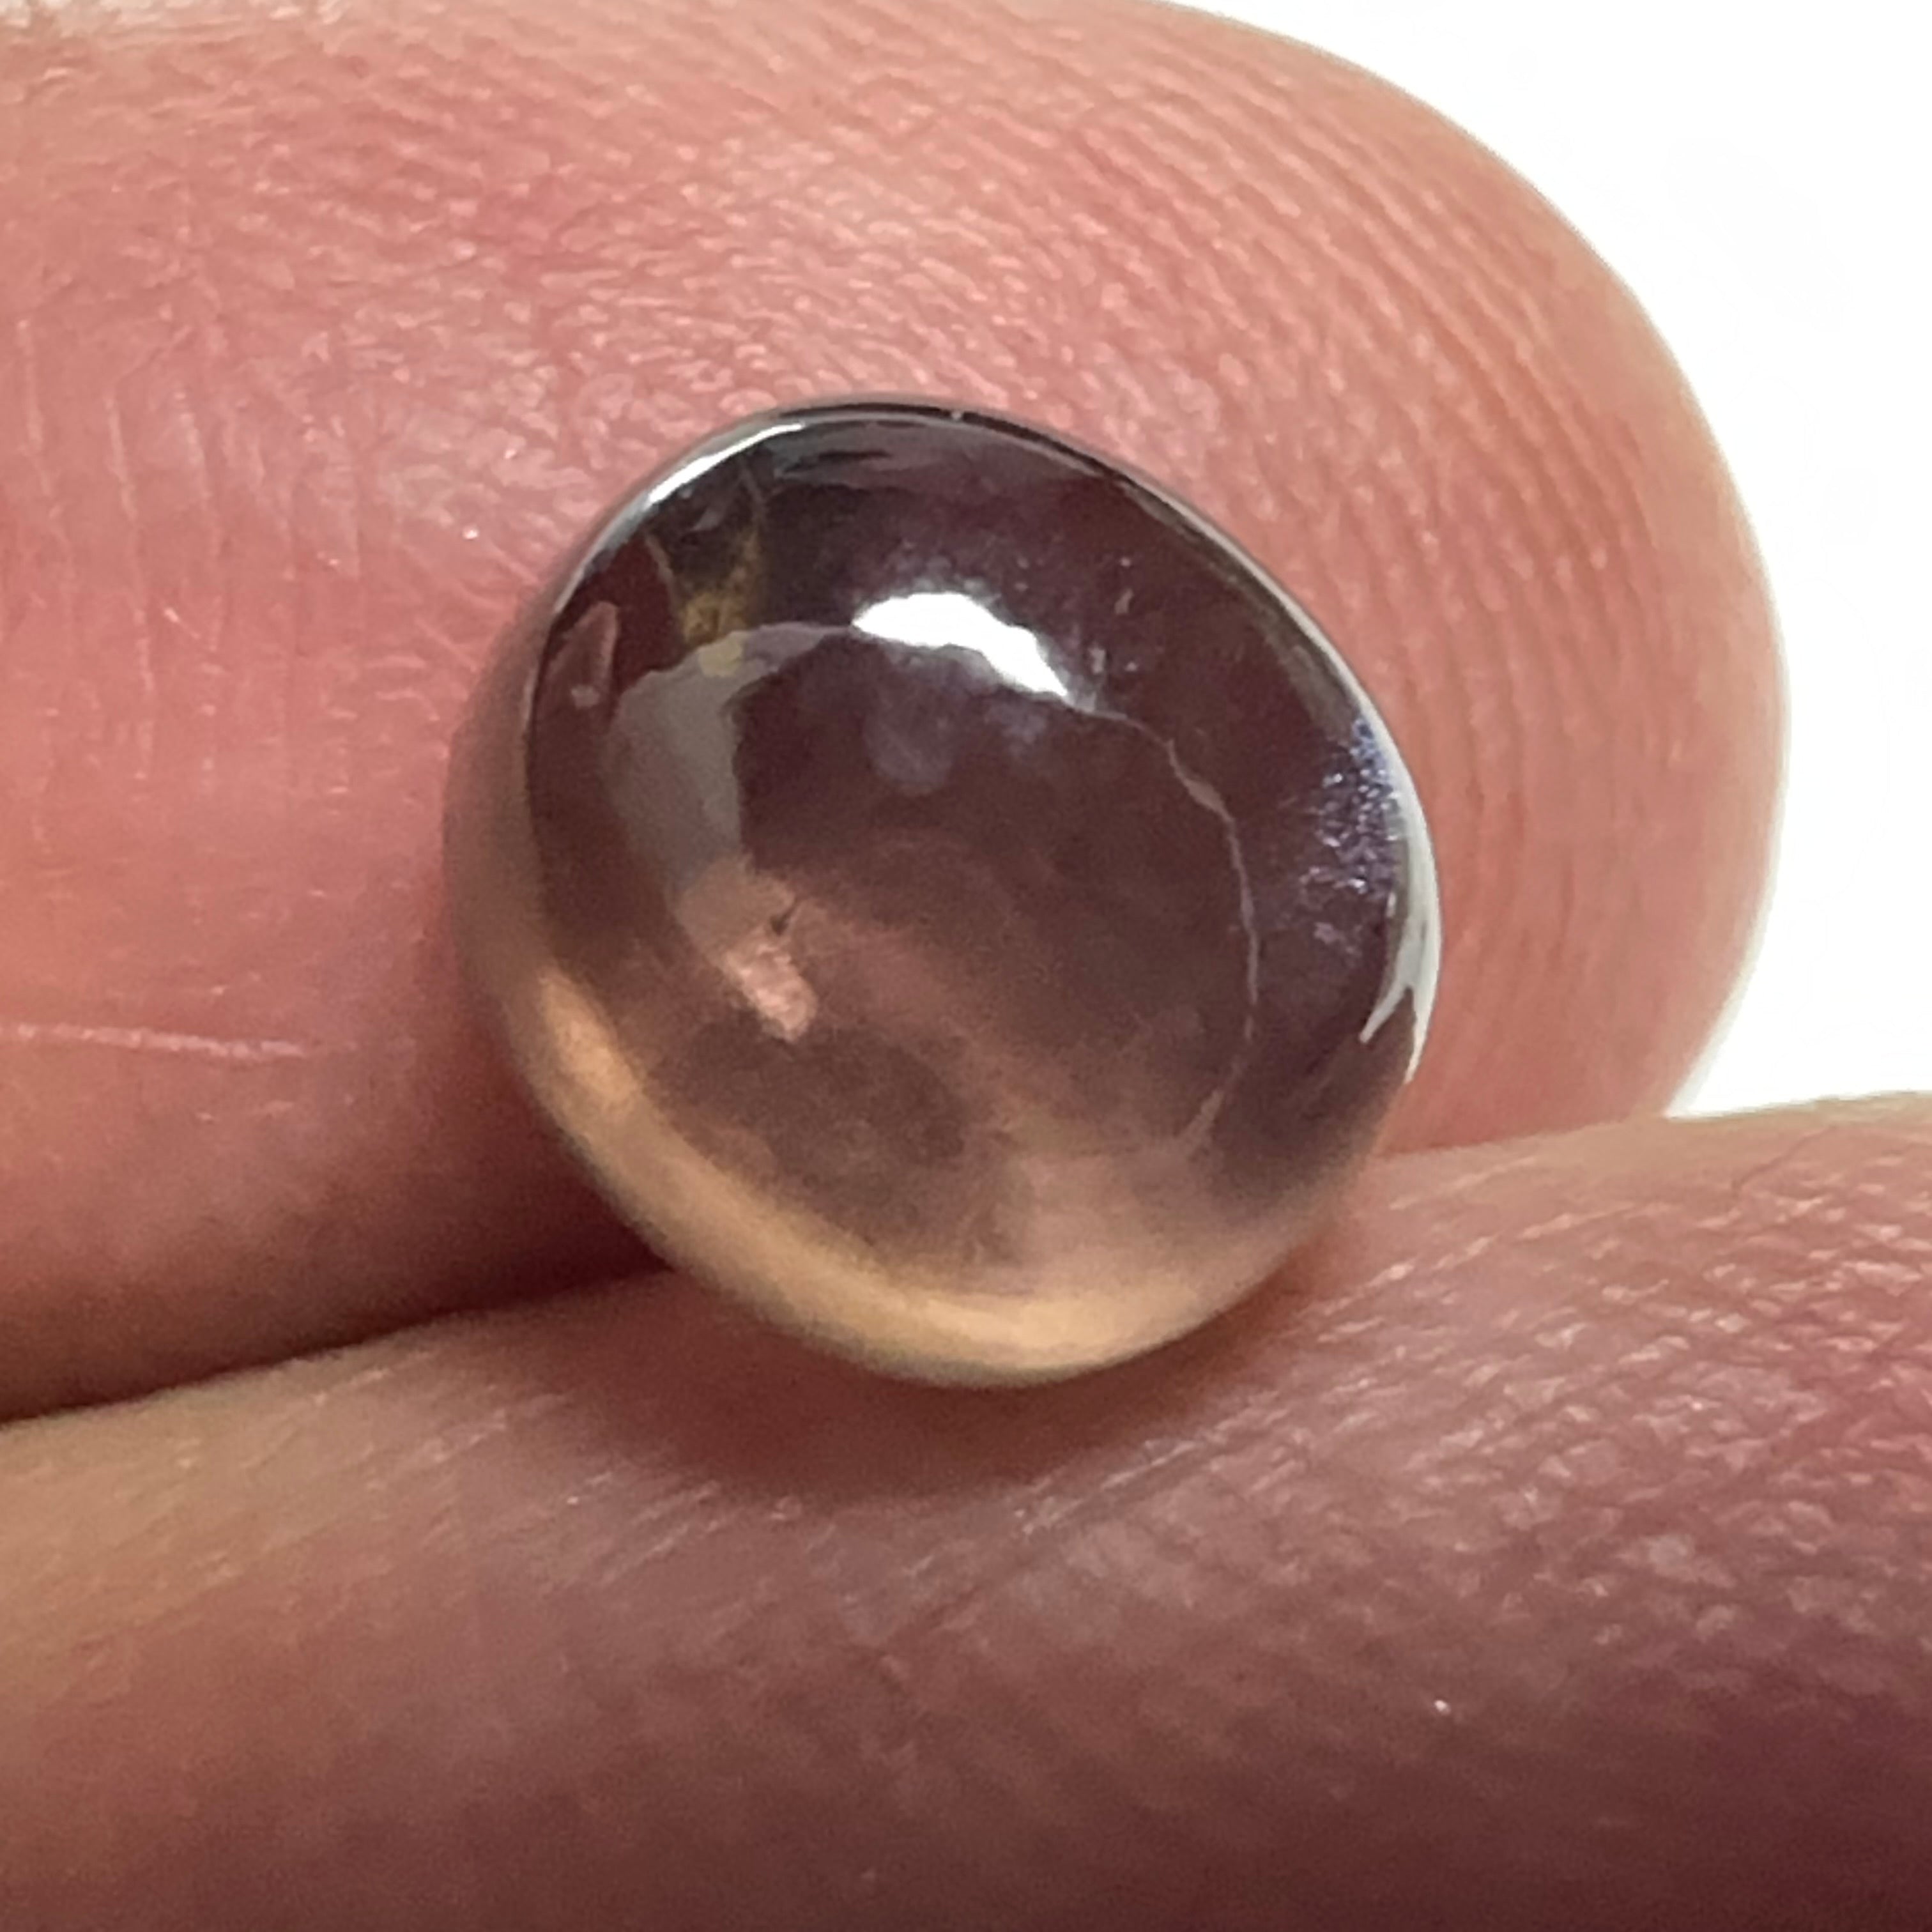 3.52ct Colour Change Sapphire Cabochon, Umba Valley, Tanzania. Untreated Unheated. Seems to have silk that appears as a moving spot